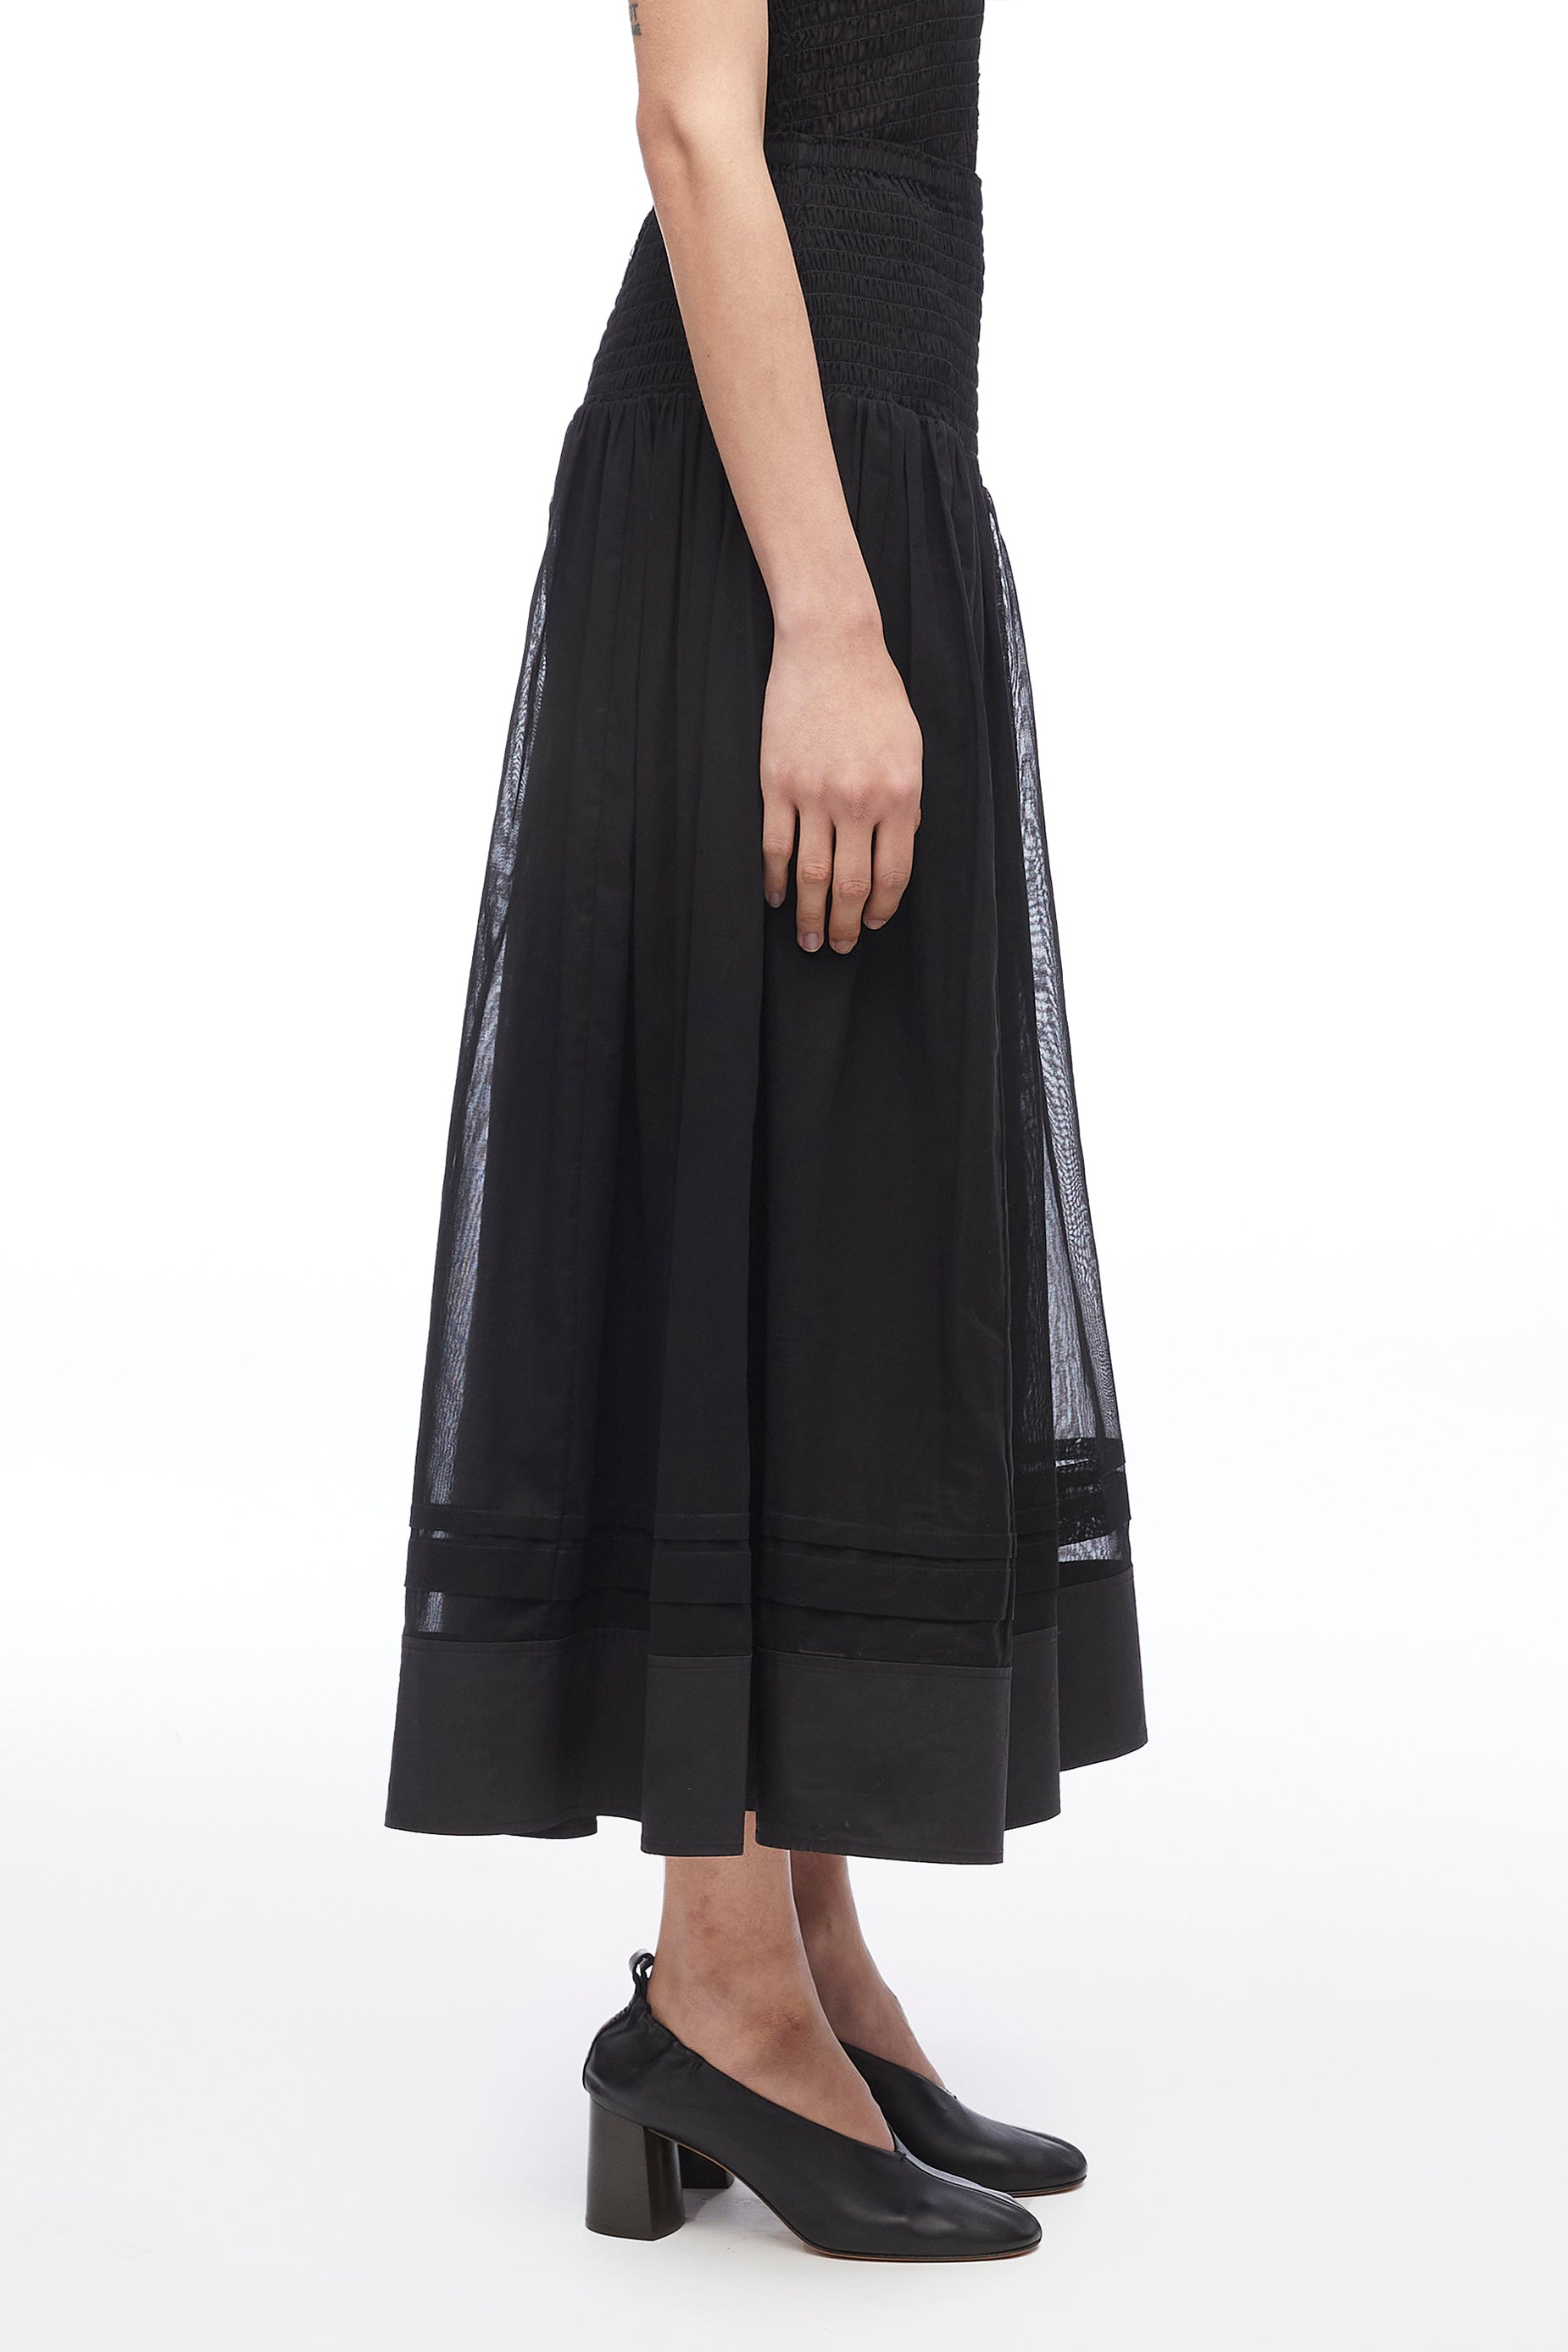 Cotton Voile Skirt With Smocking